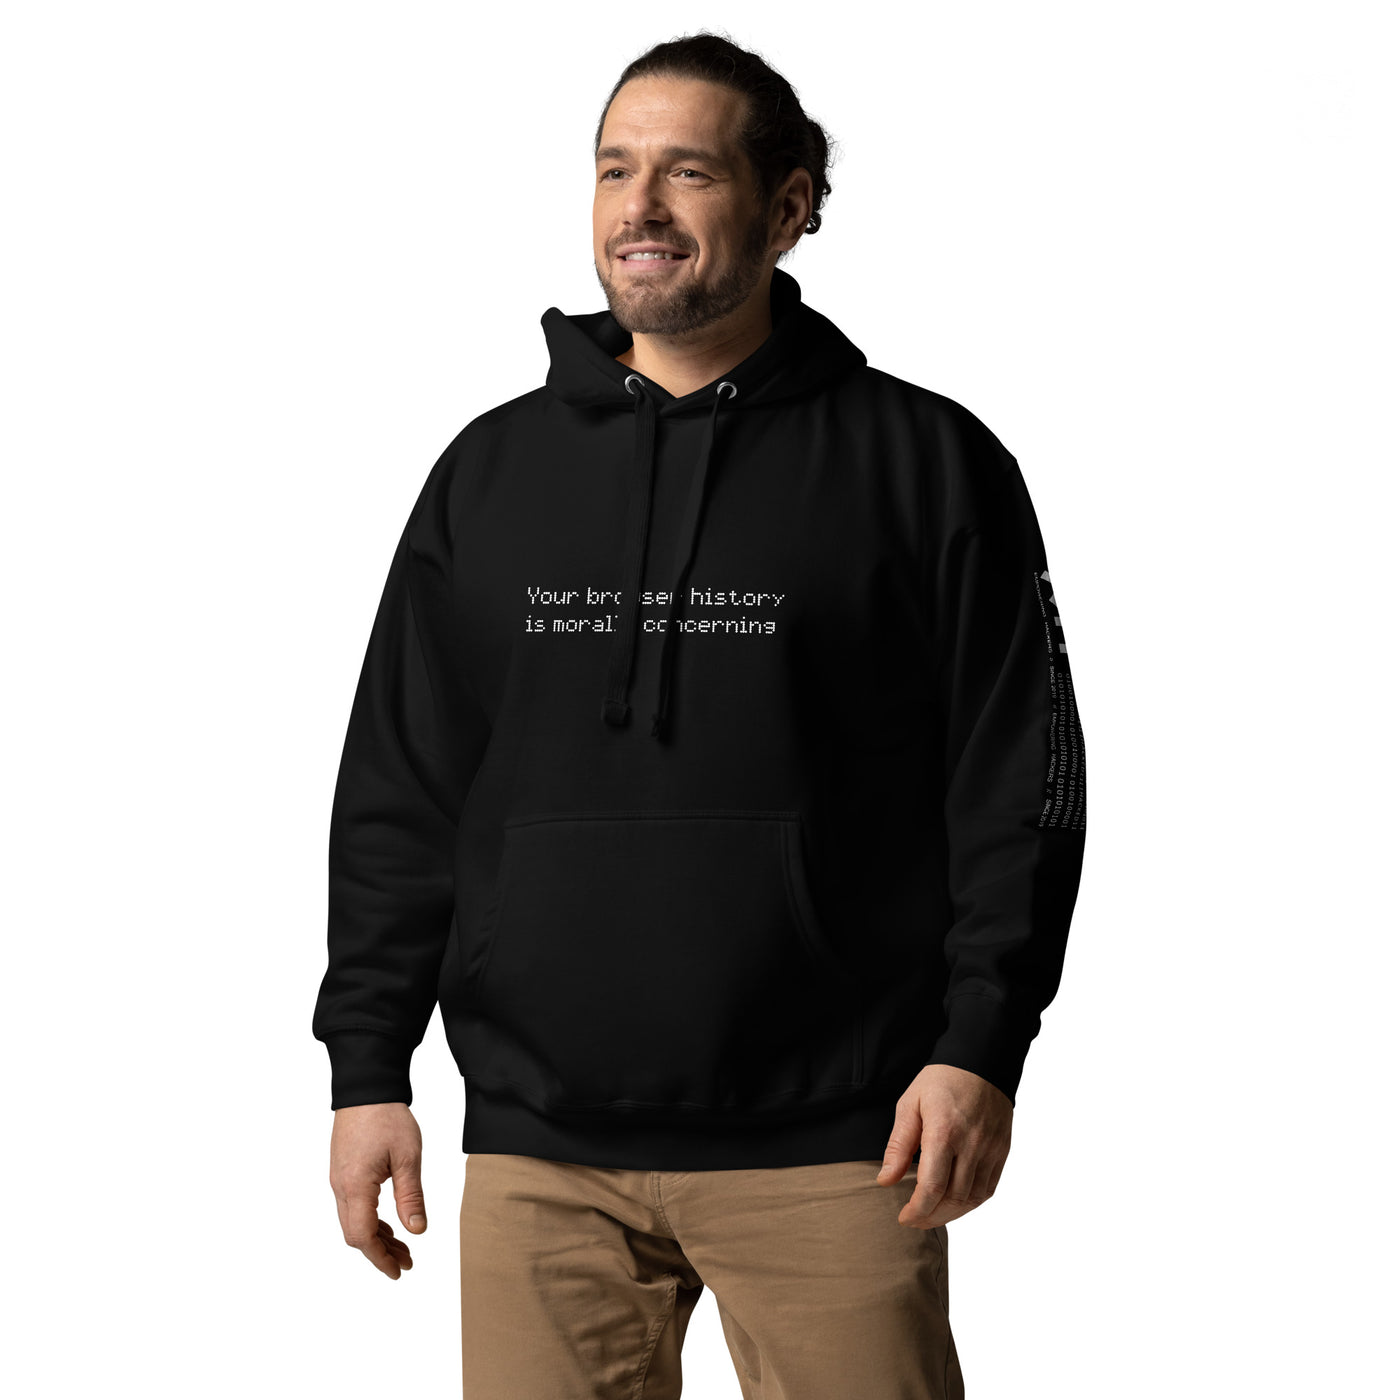 Your Browser History is Morally Concerning  V2 Unisex Hoodie